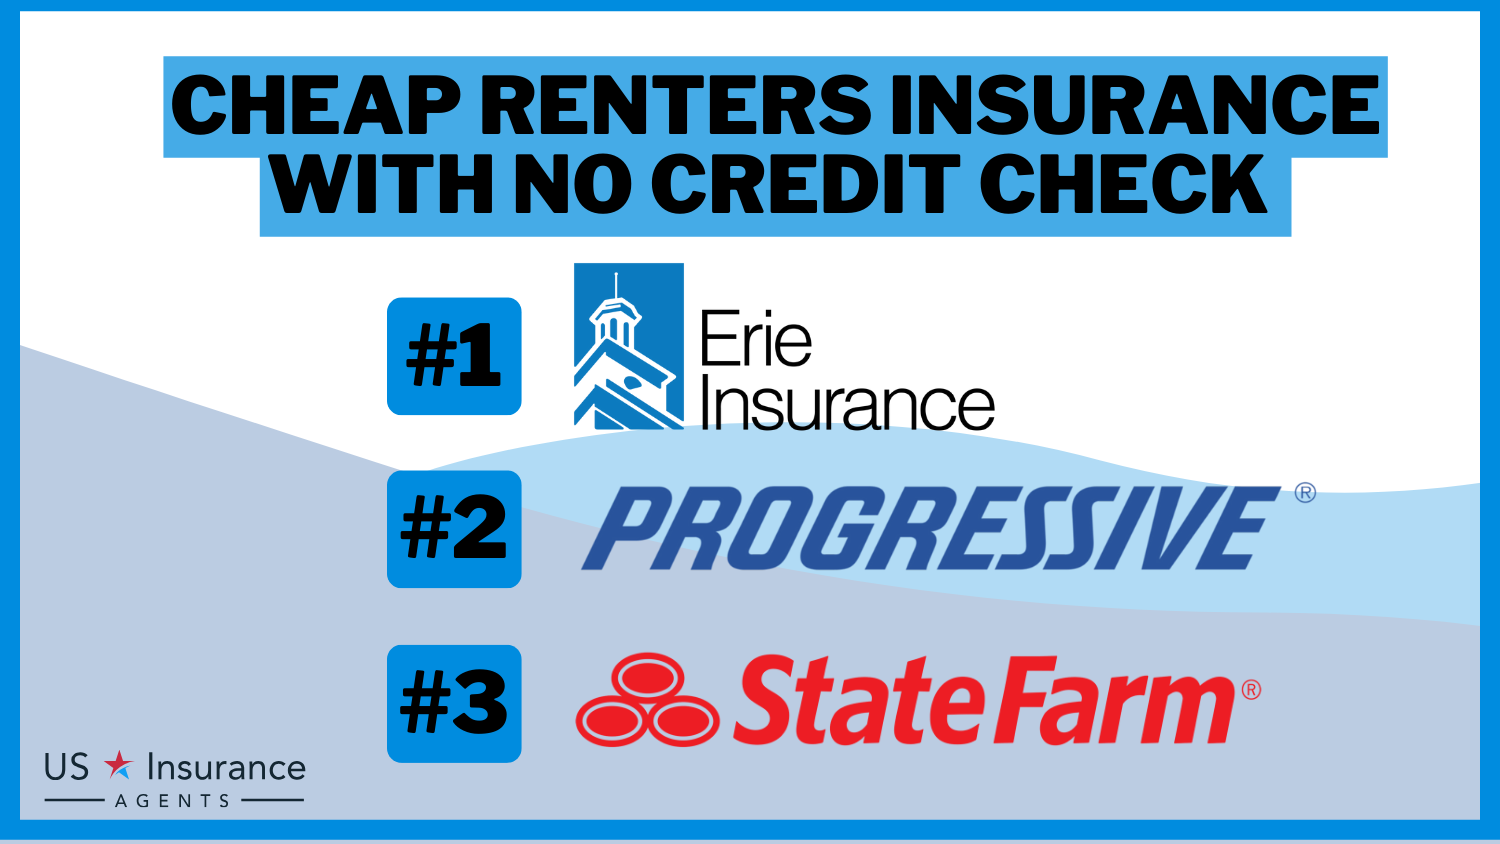 Cheap Renters Insurance With No Credit Check: Erie, Progressive, and State Farm